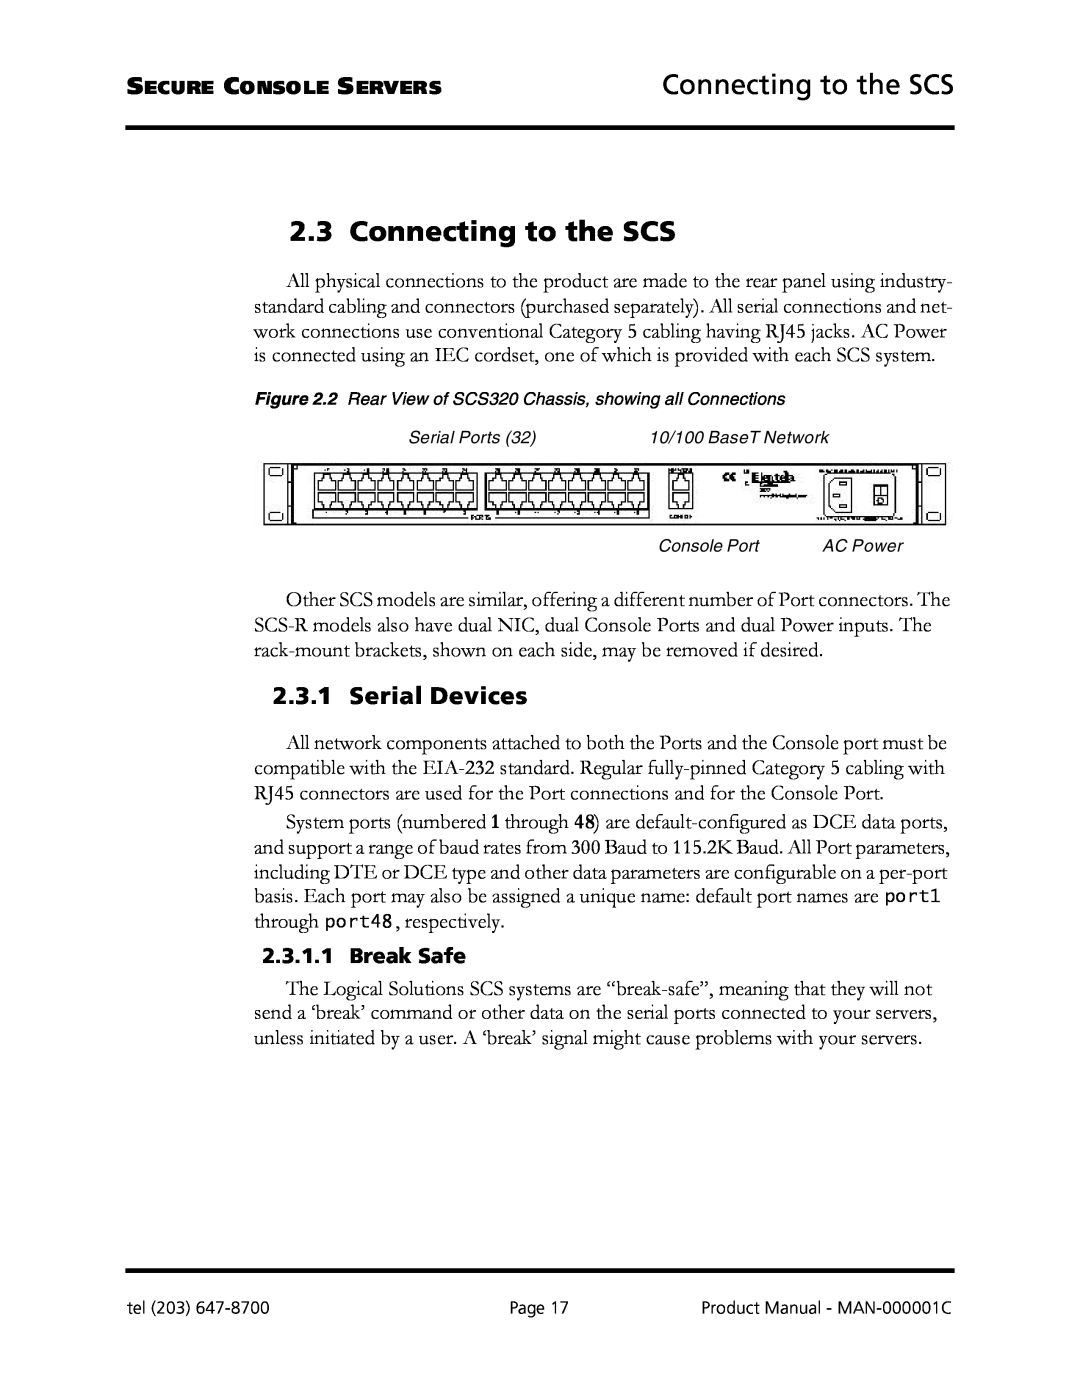 Logical Solutions SCS-R manual Connecting to the SCS, Serial Devices, Break Safe 